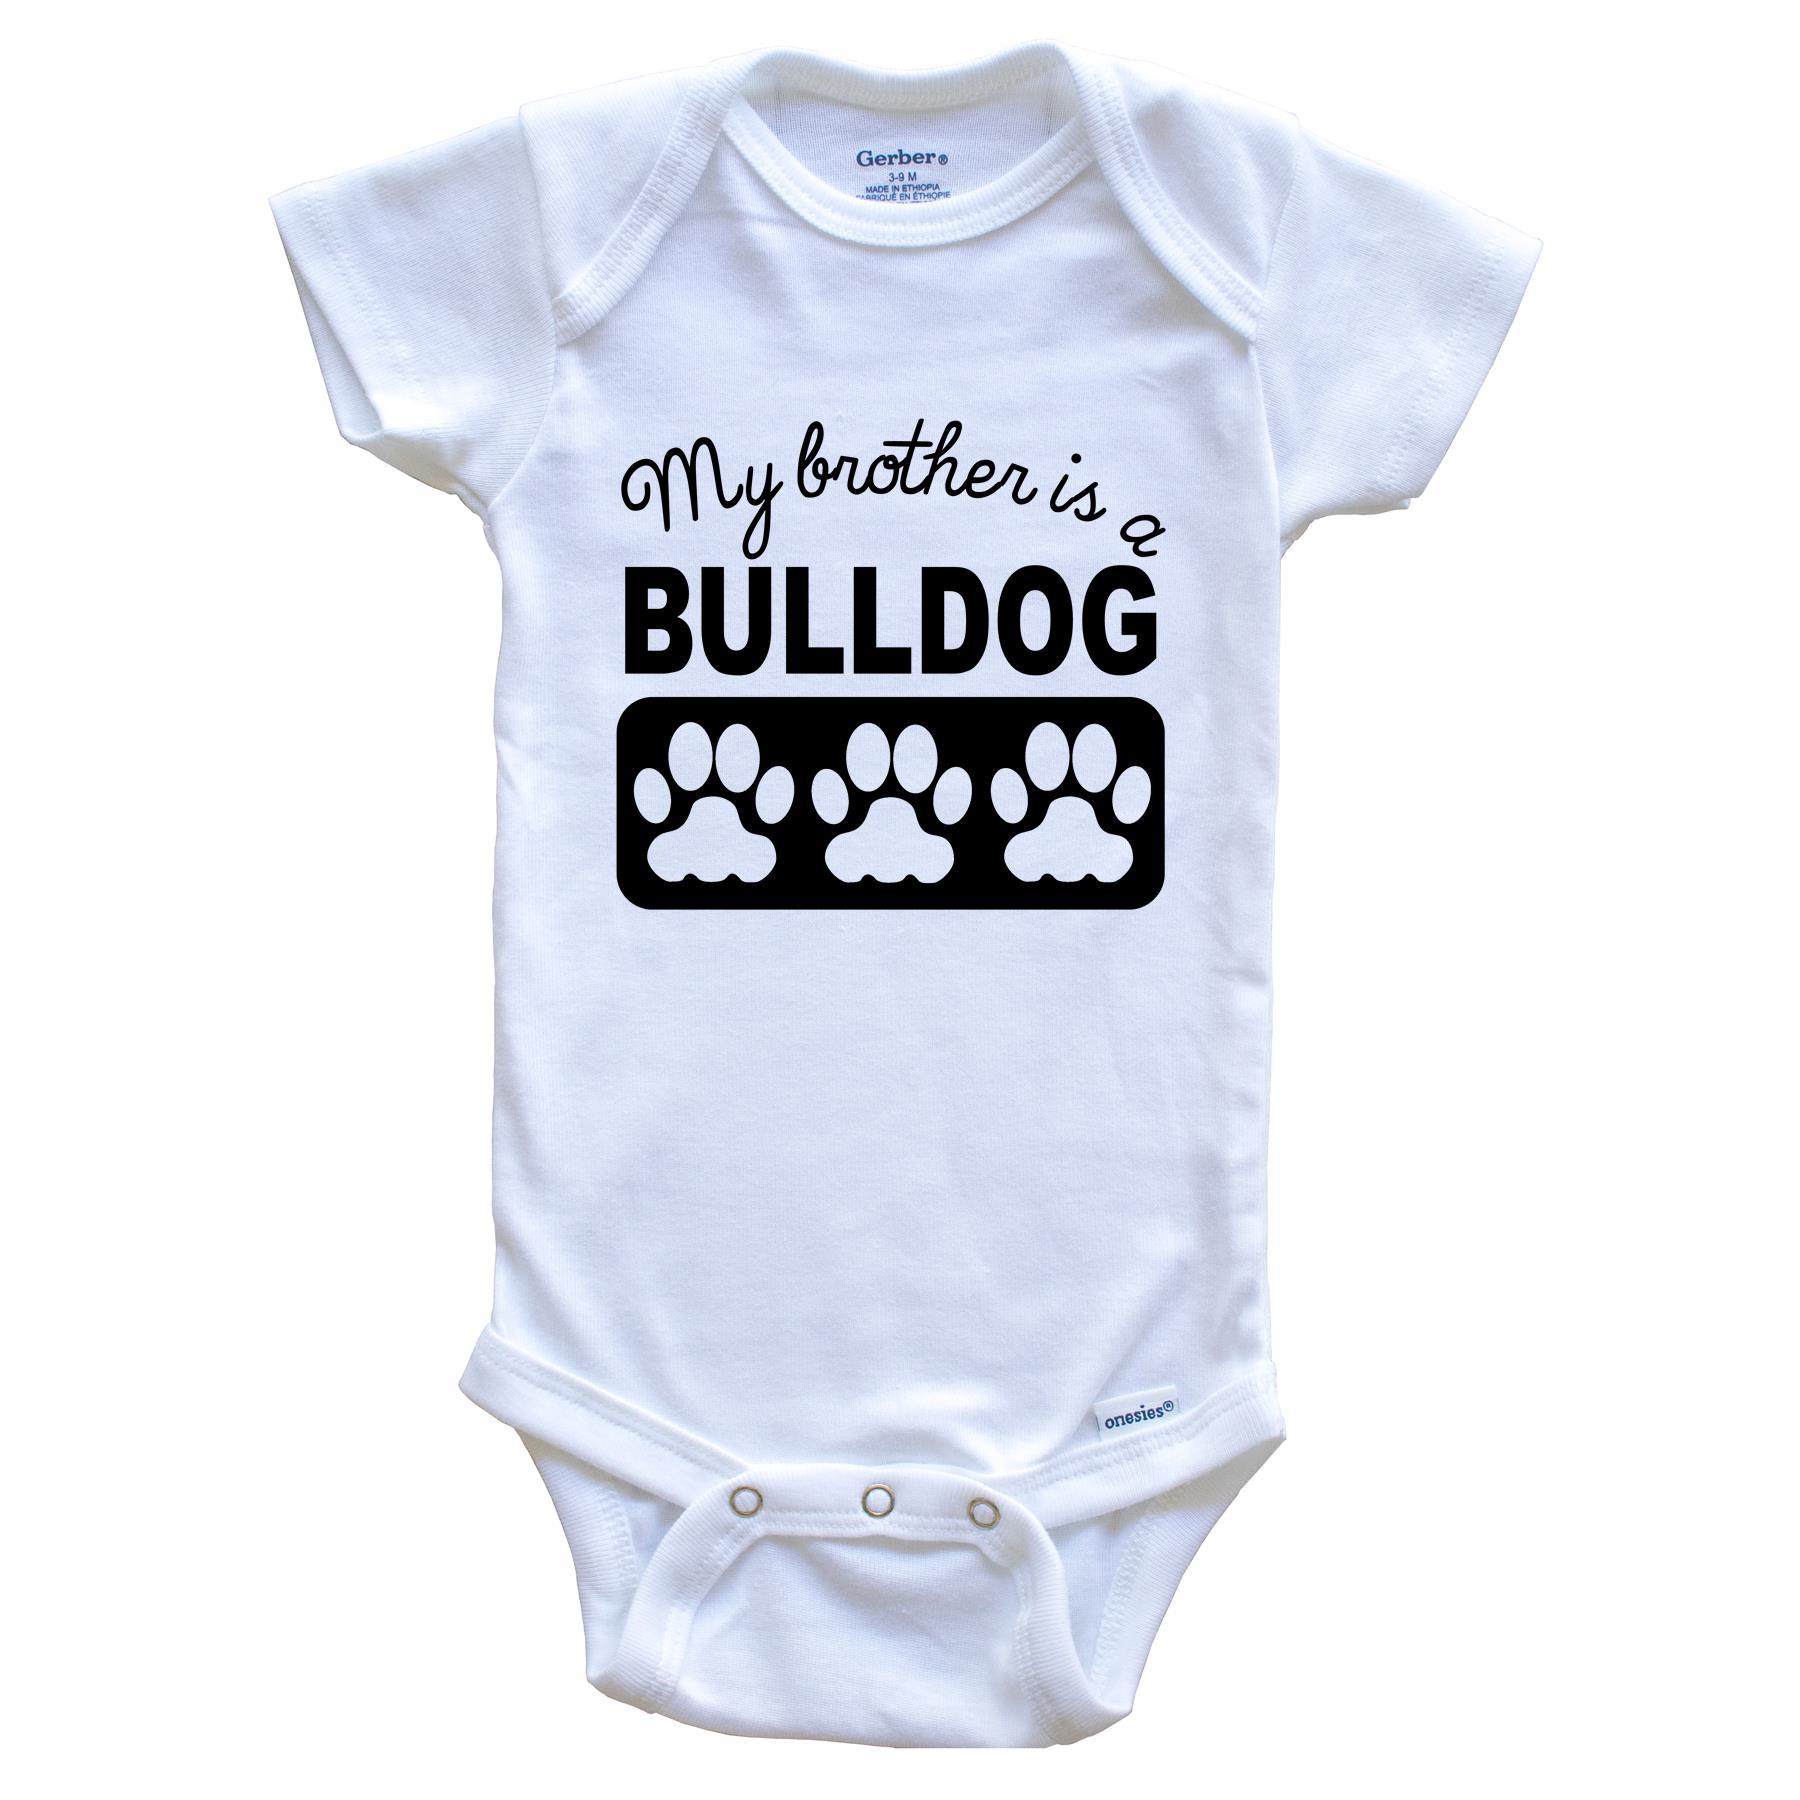 My Brother Is A Bulldog Baby Onesie